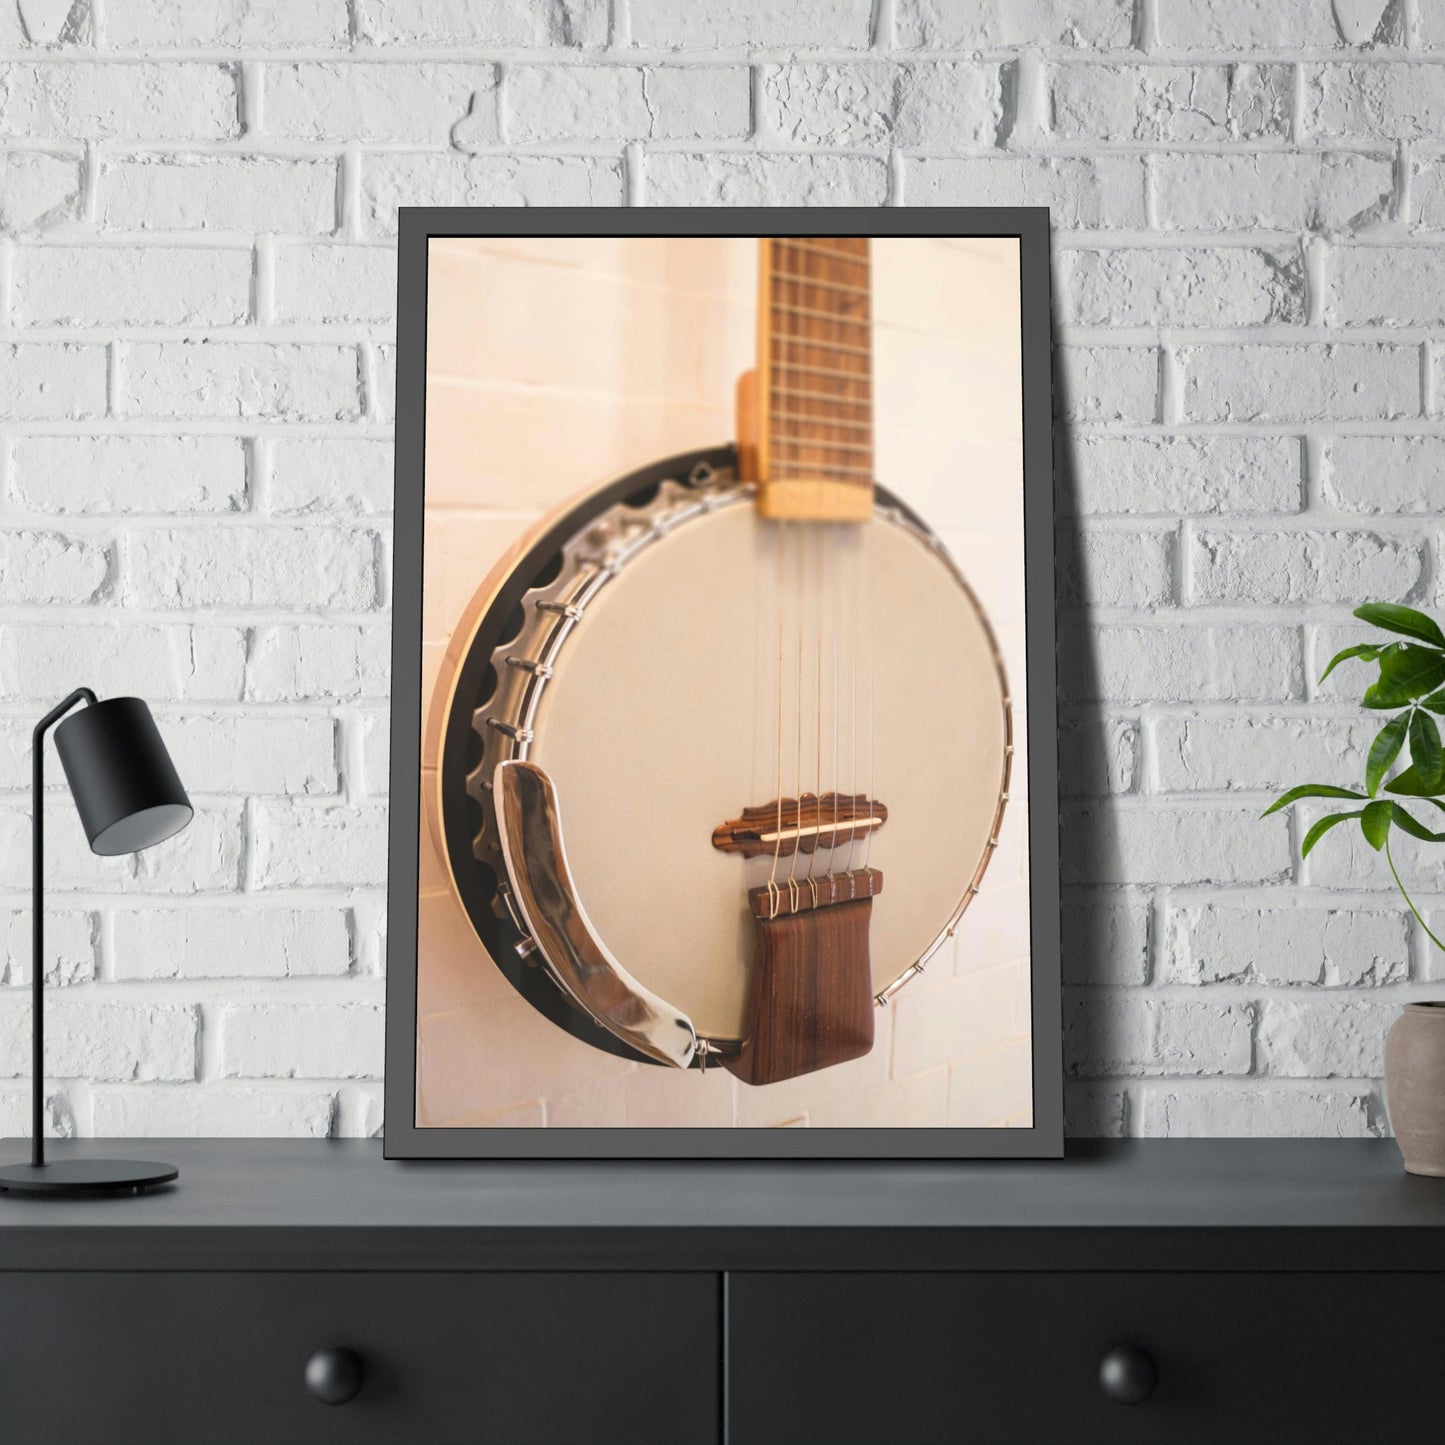 Melodic Strings: Art Print on Canvas with a Close-Up of a Banjo